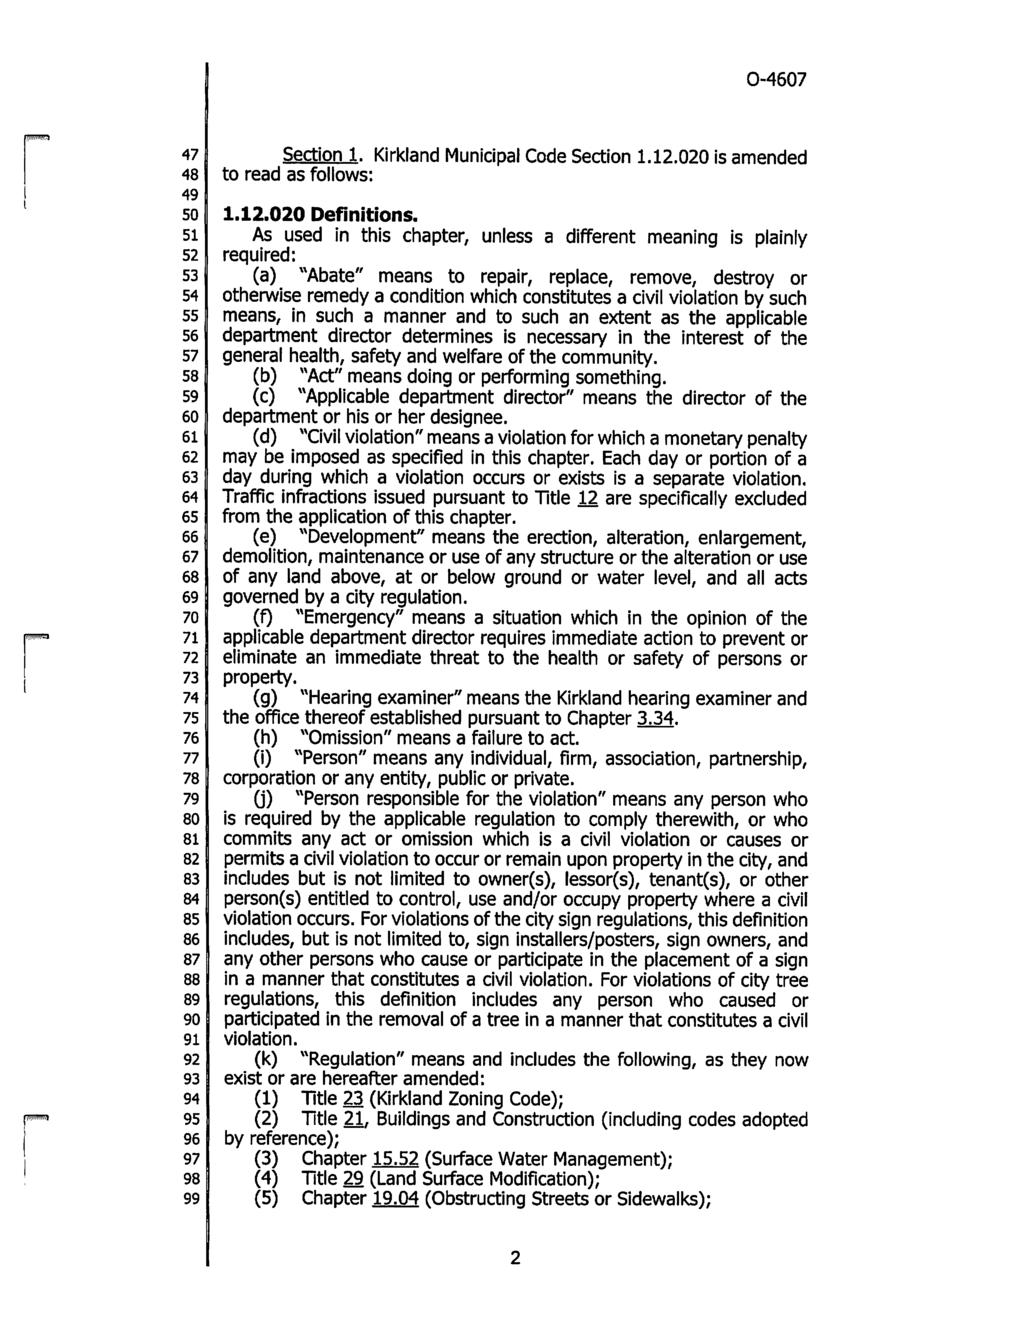 47 Section 1. Kirkland Municipal Code Section 1.12.020 is amended 48 to read as follows: 49 50 1.12.020 Definitions.